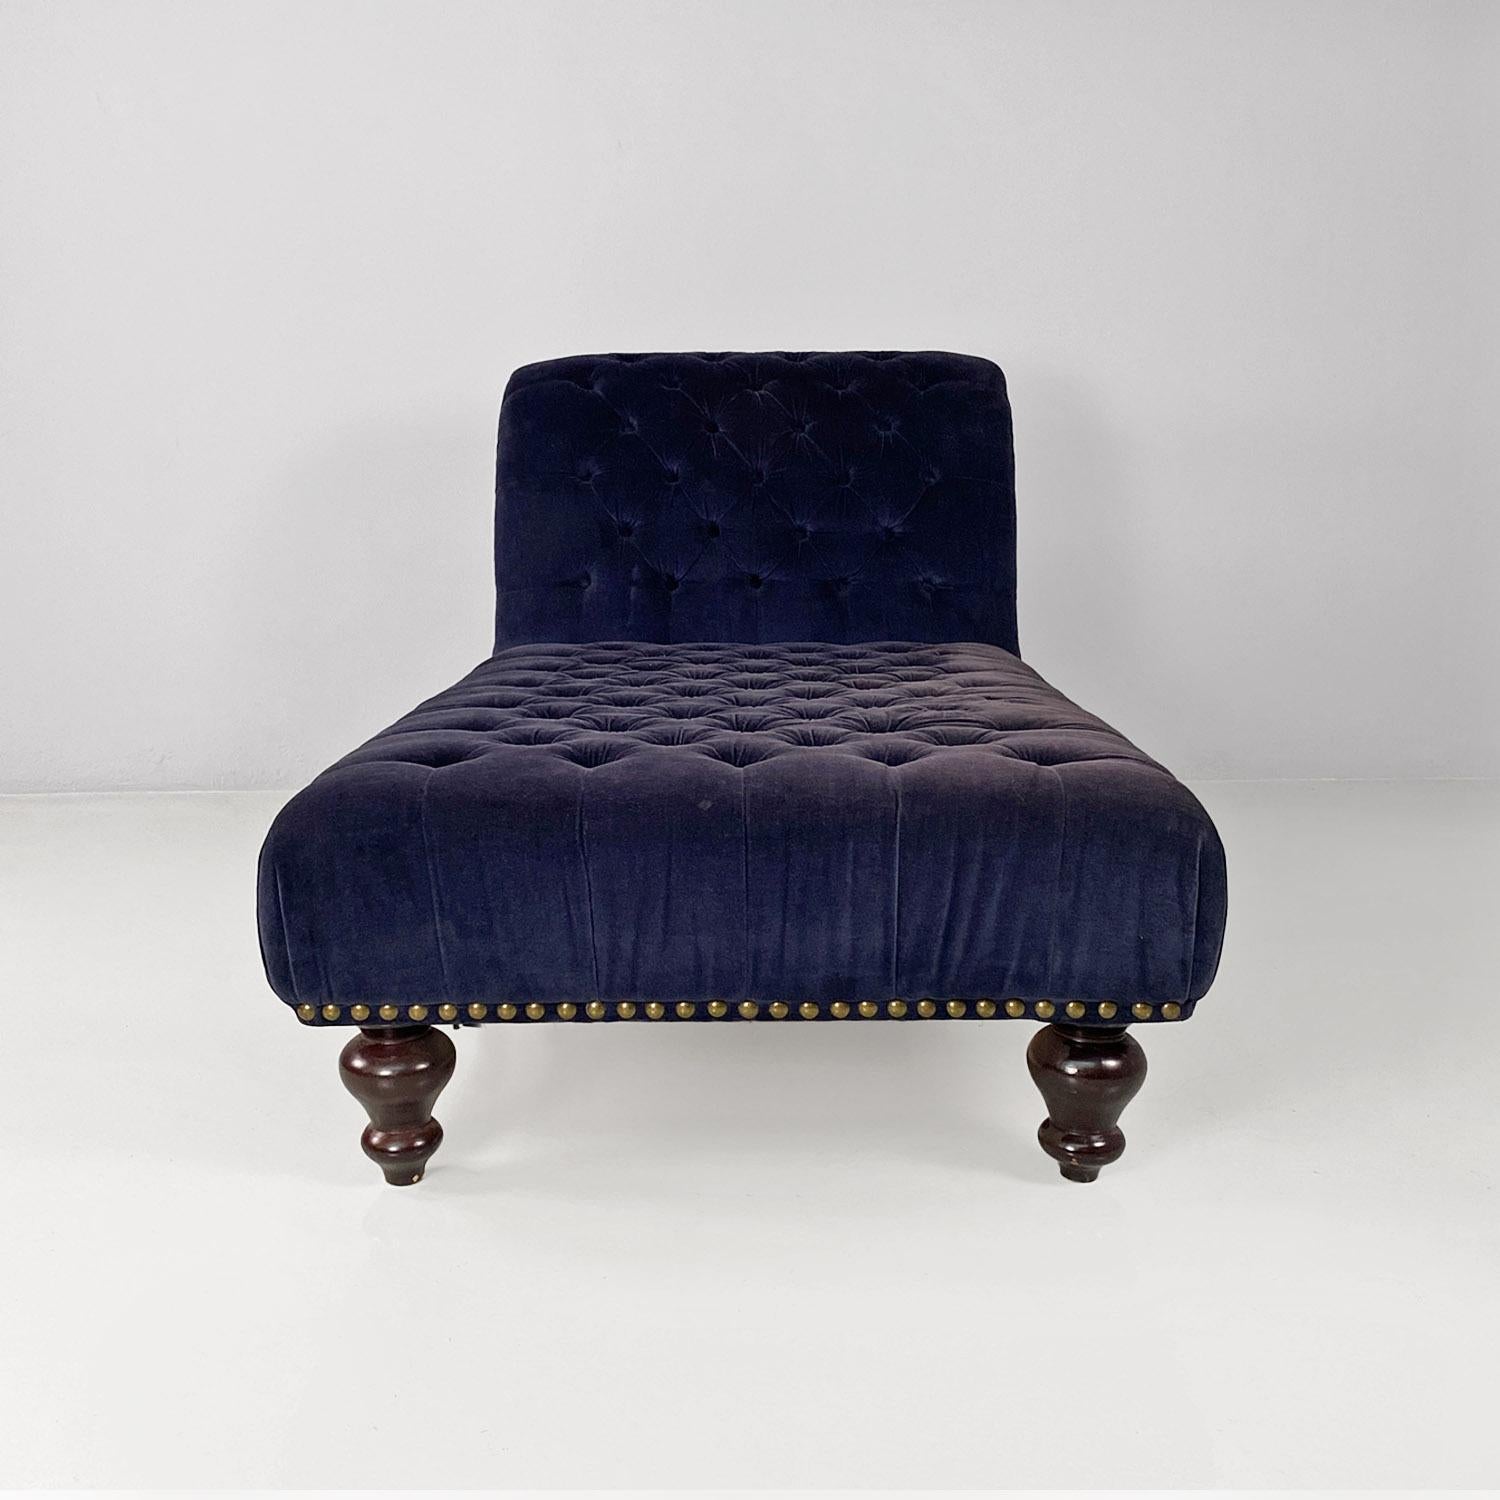 Romantic Italian antique style blue velvet and wood dormeuse or chaise longue, 1980s For Sale